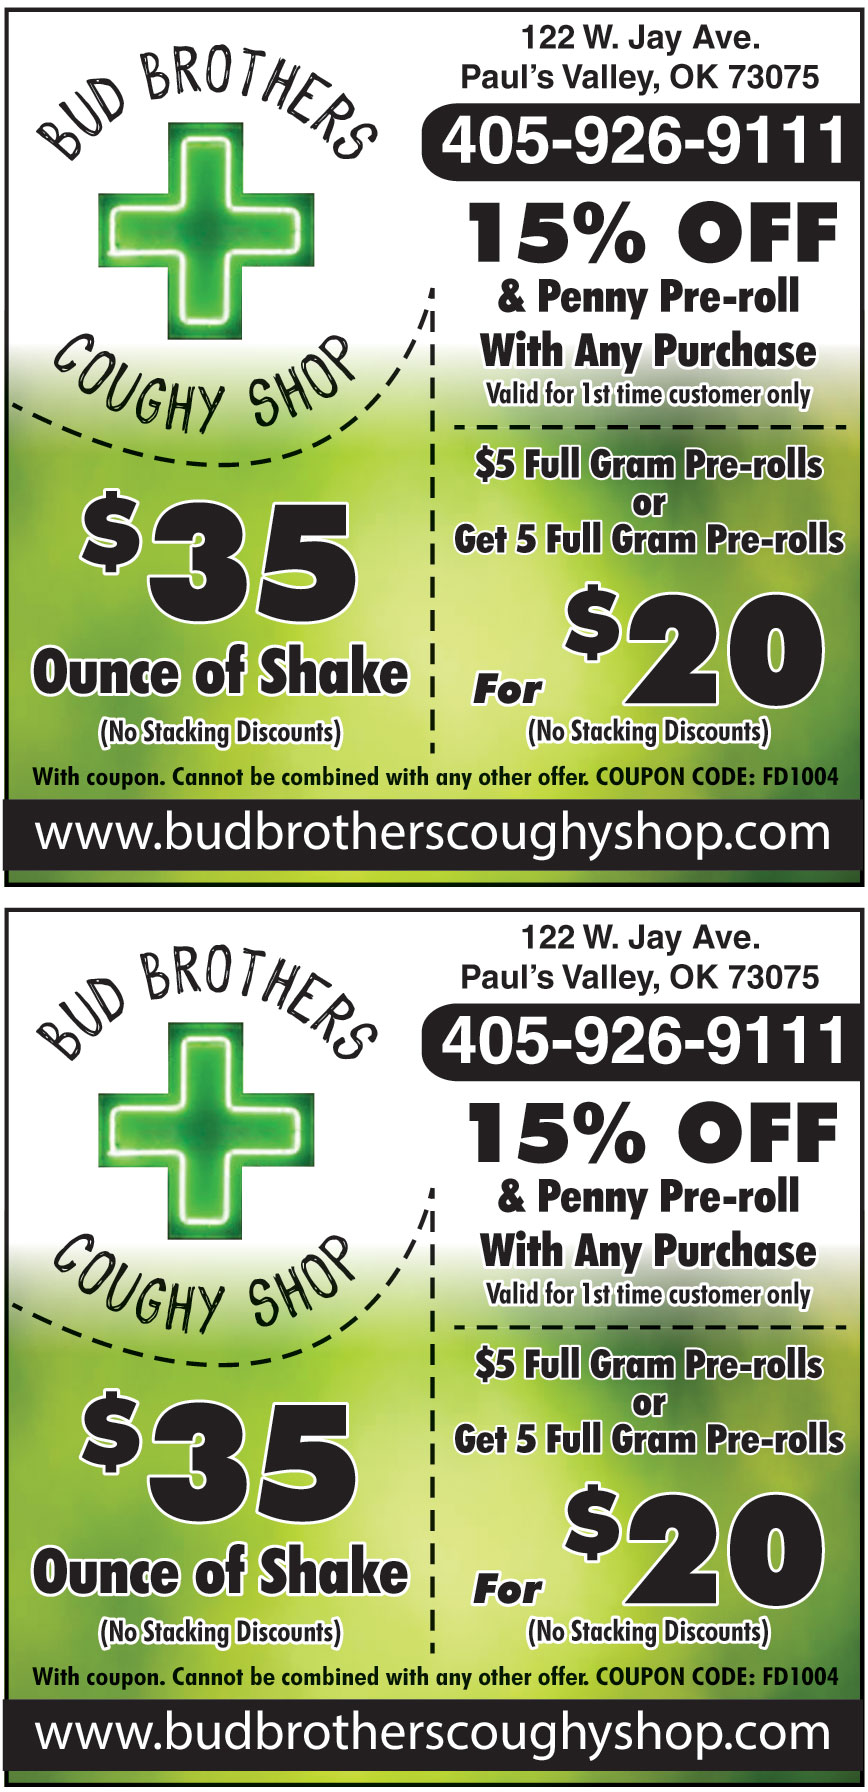 BUD BROTHERS COUGHY SHOP